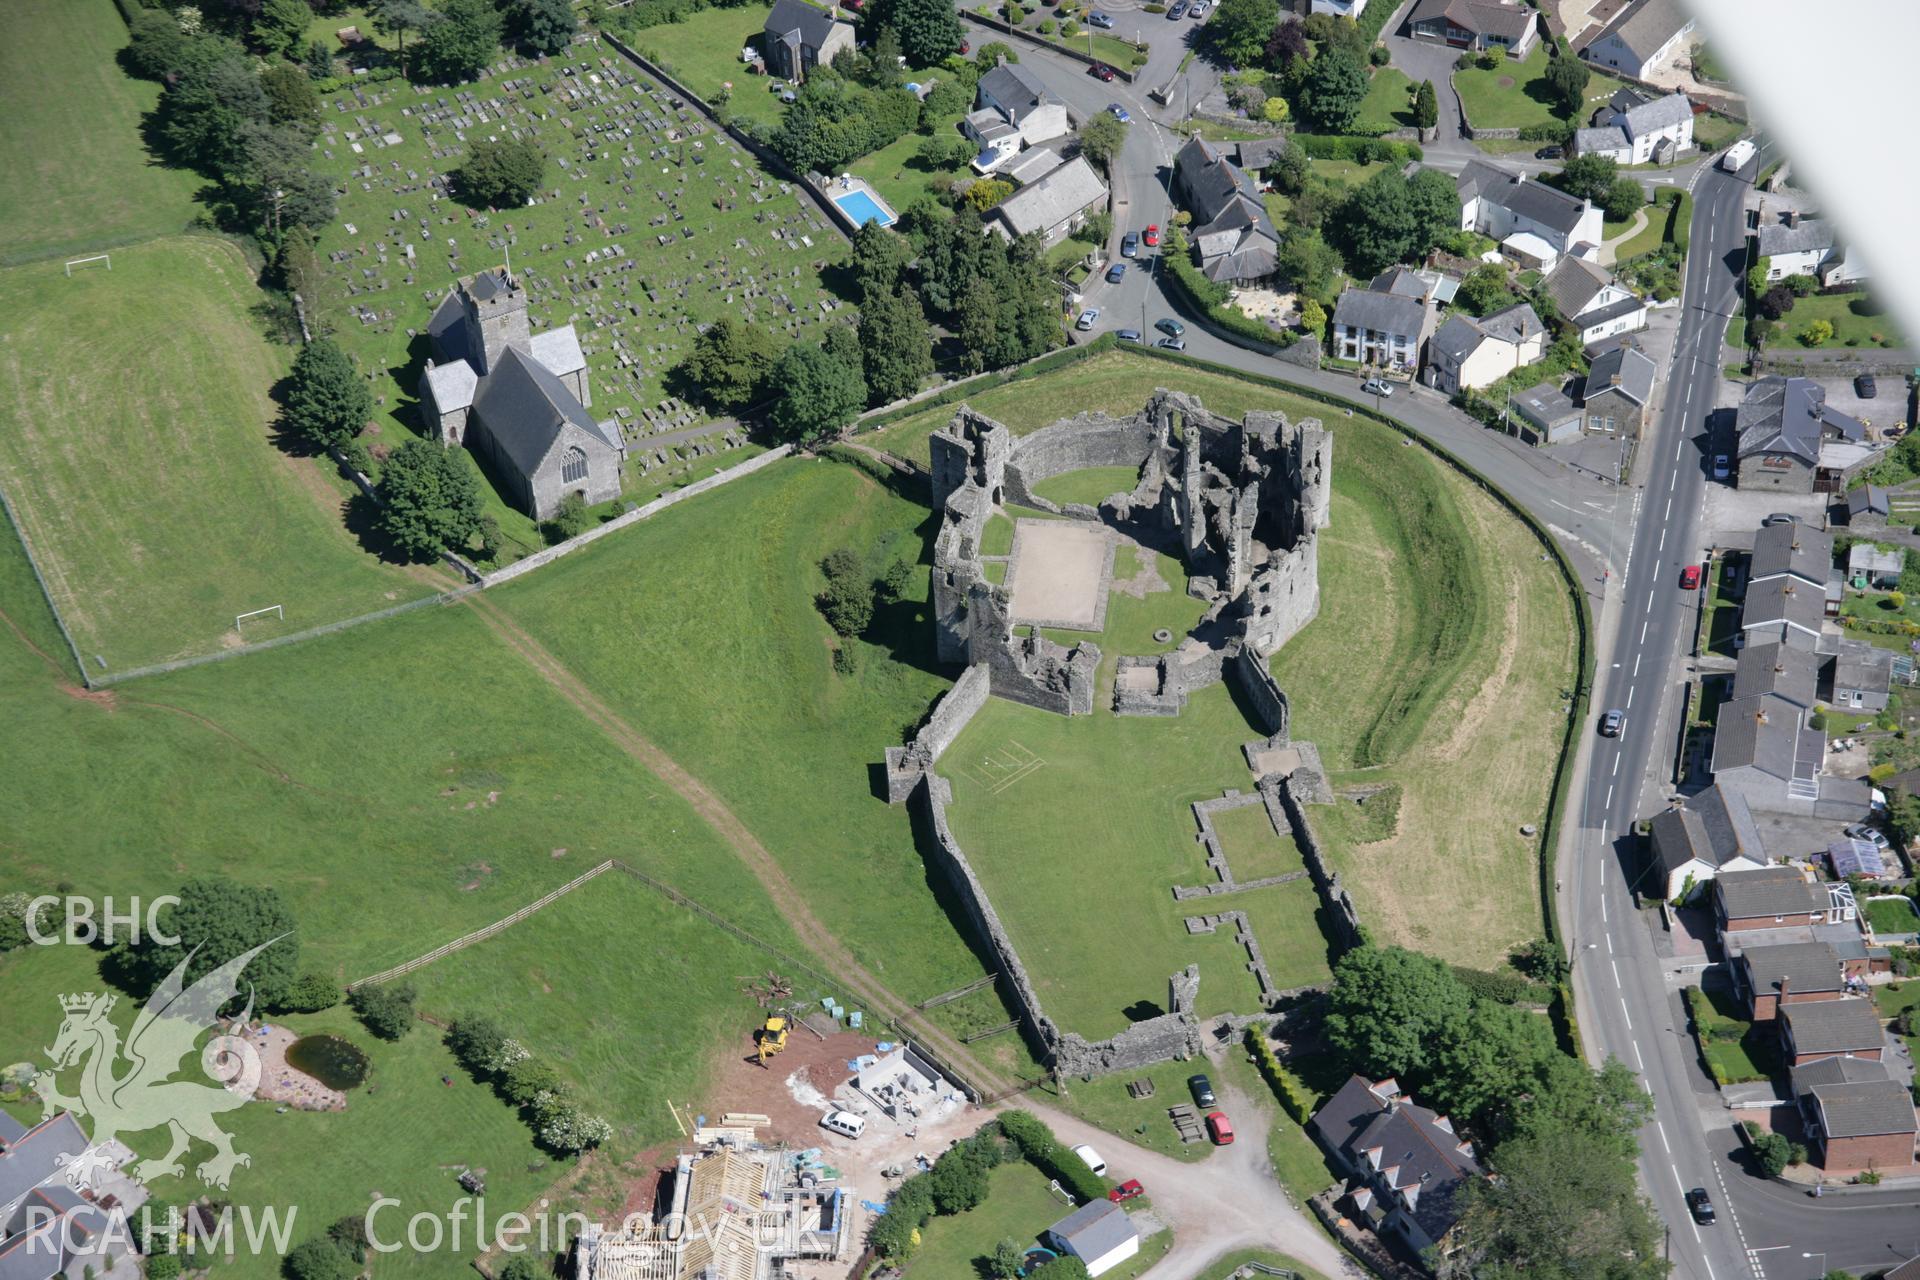 RCAHMW colour oblique aerial photograph of Coity Castle from the west. Taken on 22 June 2005 by Toby Driver